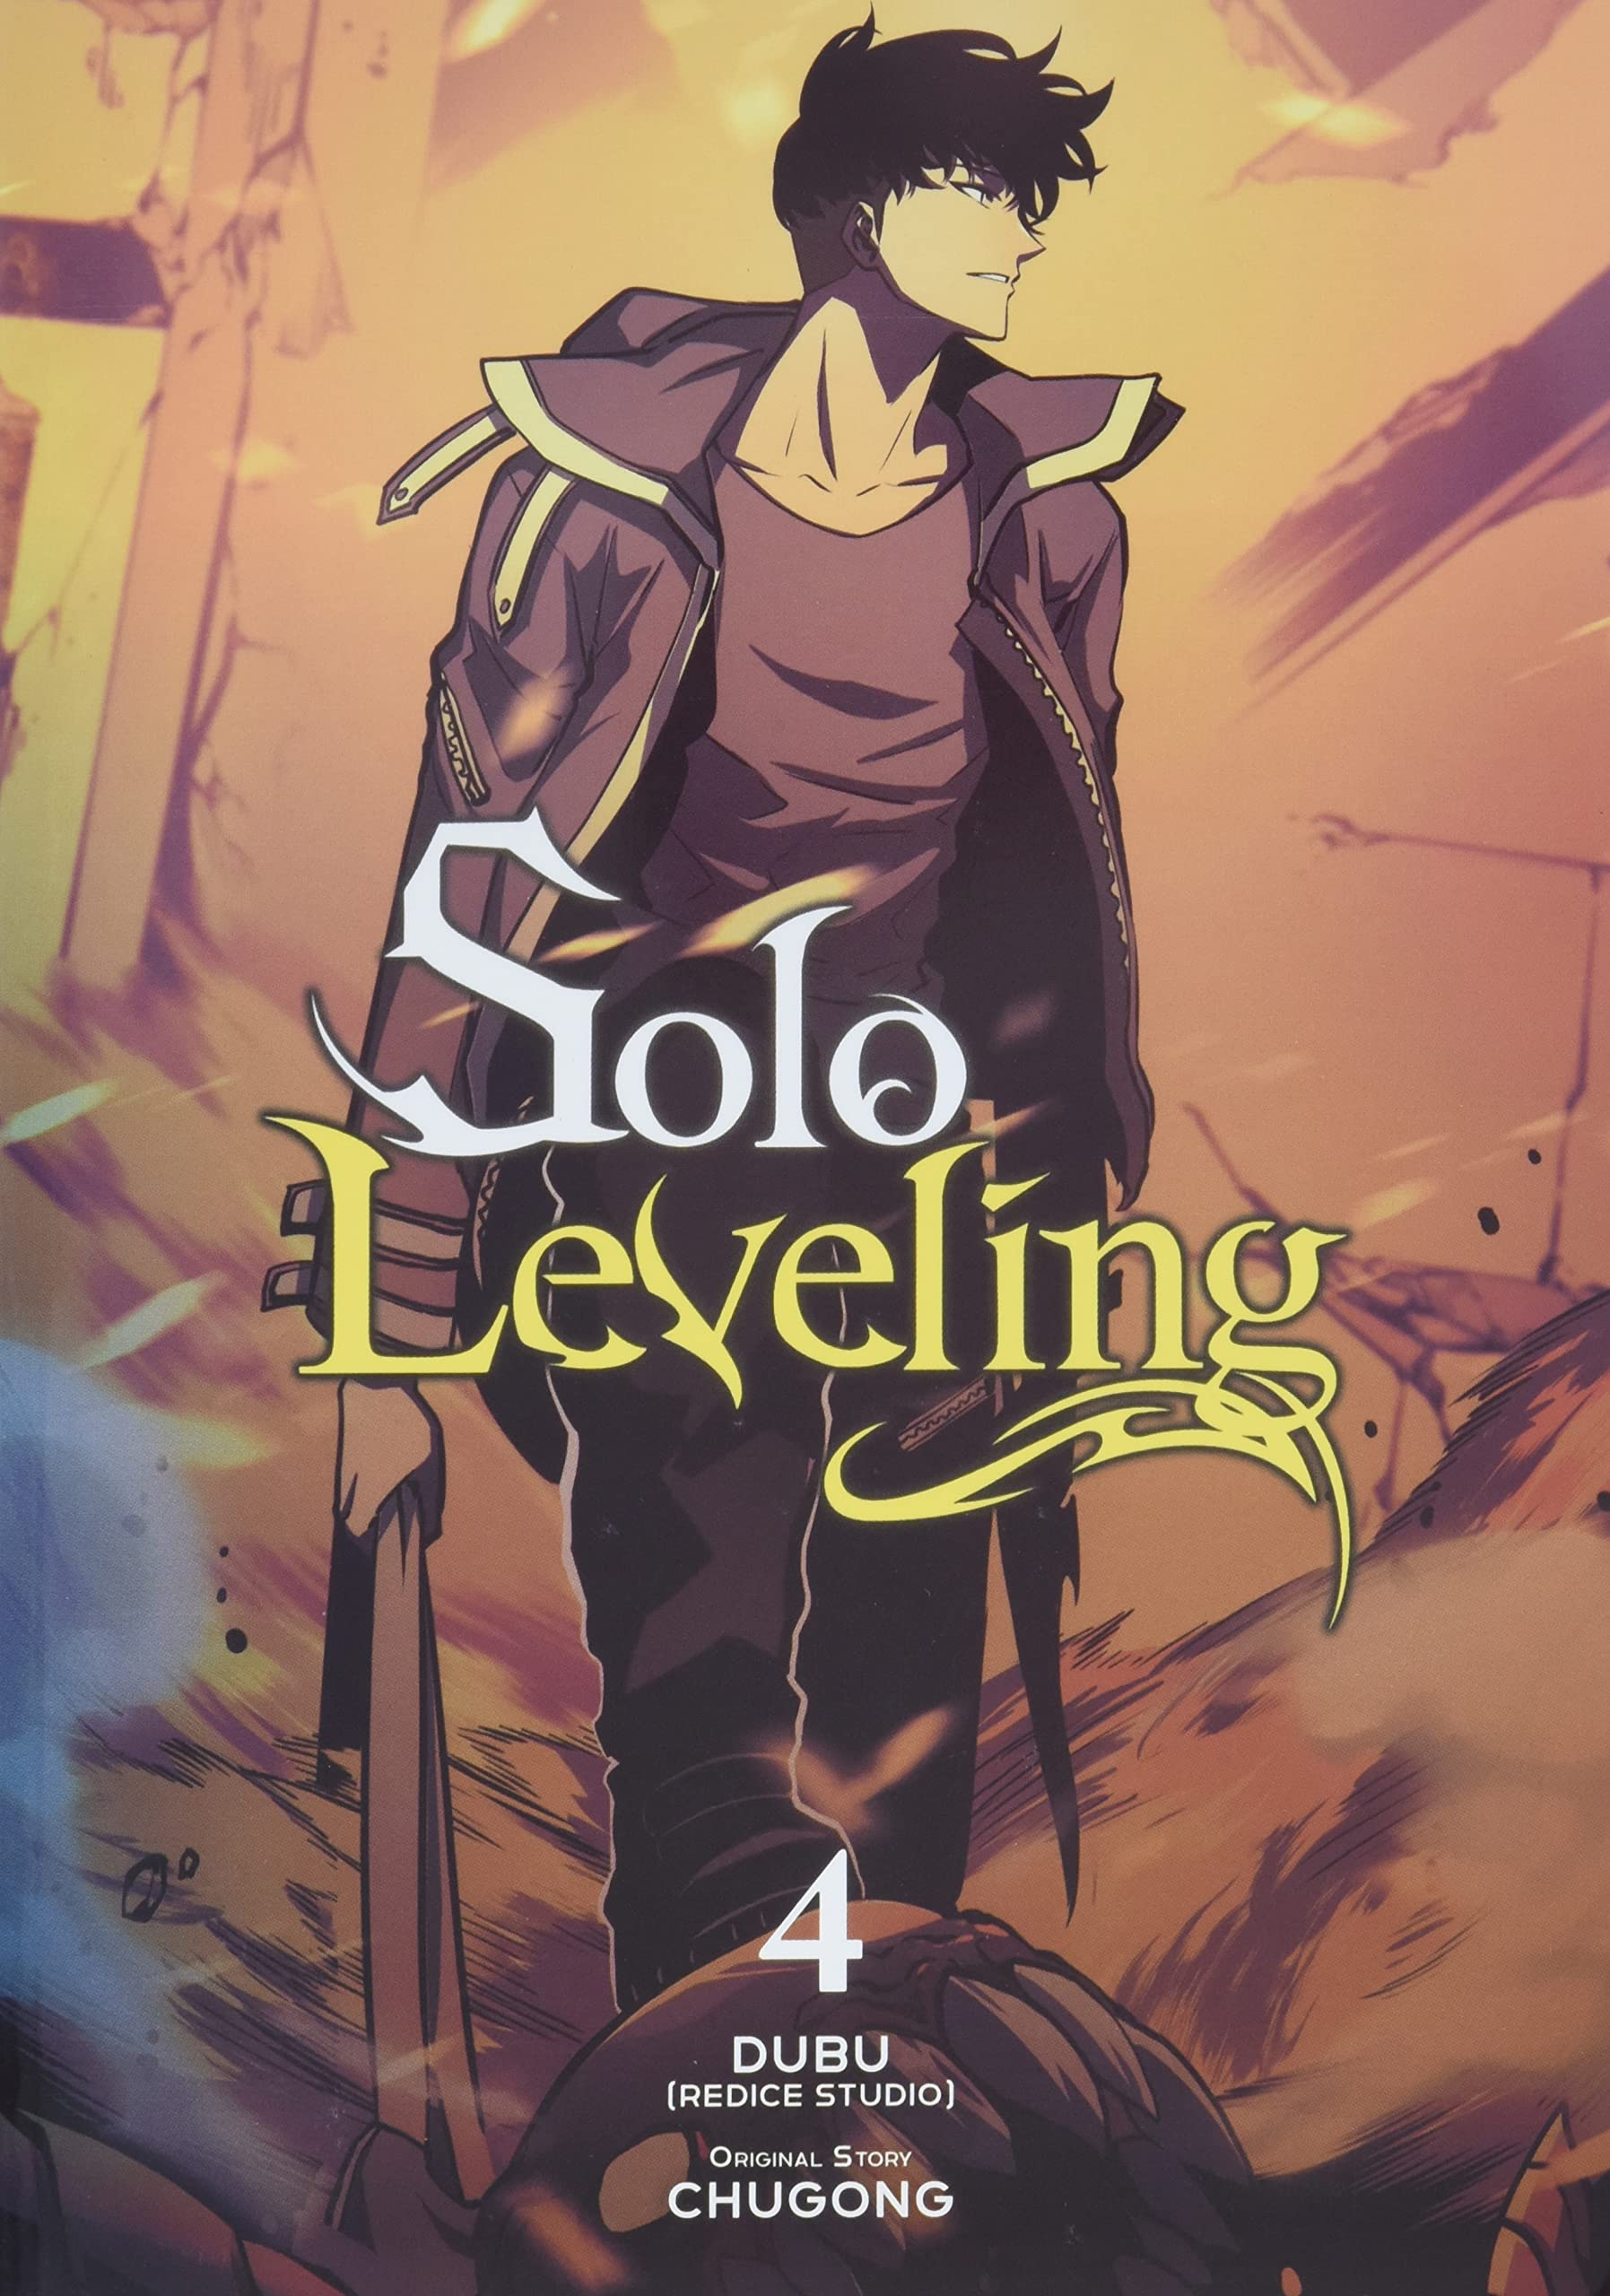 Crunchyroll Sets 'Solo Leveling' Theatrical Premieres in Europe